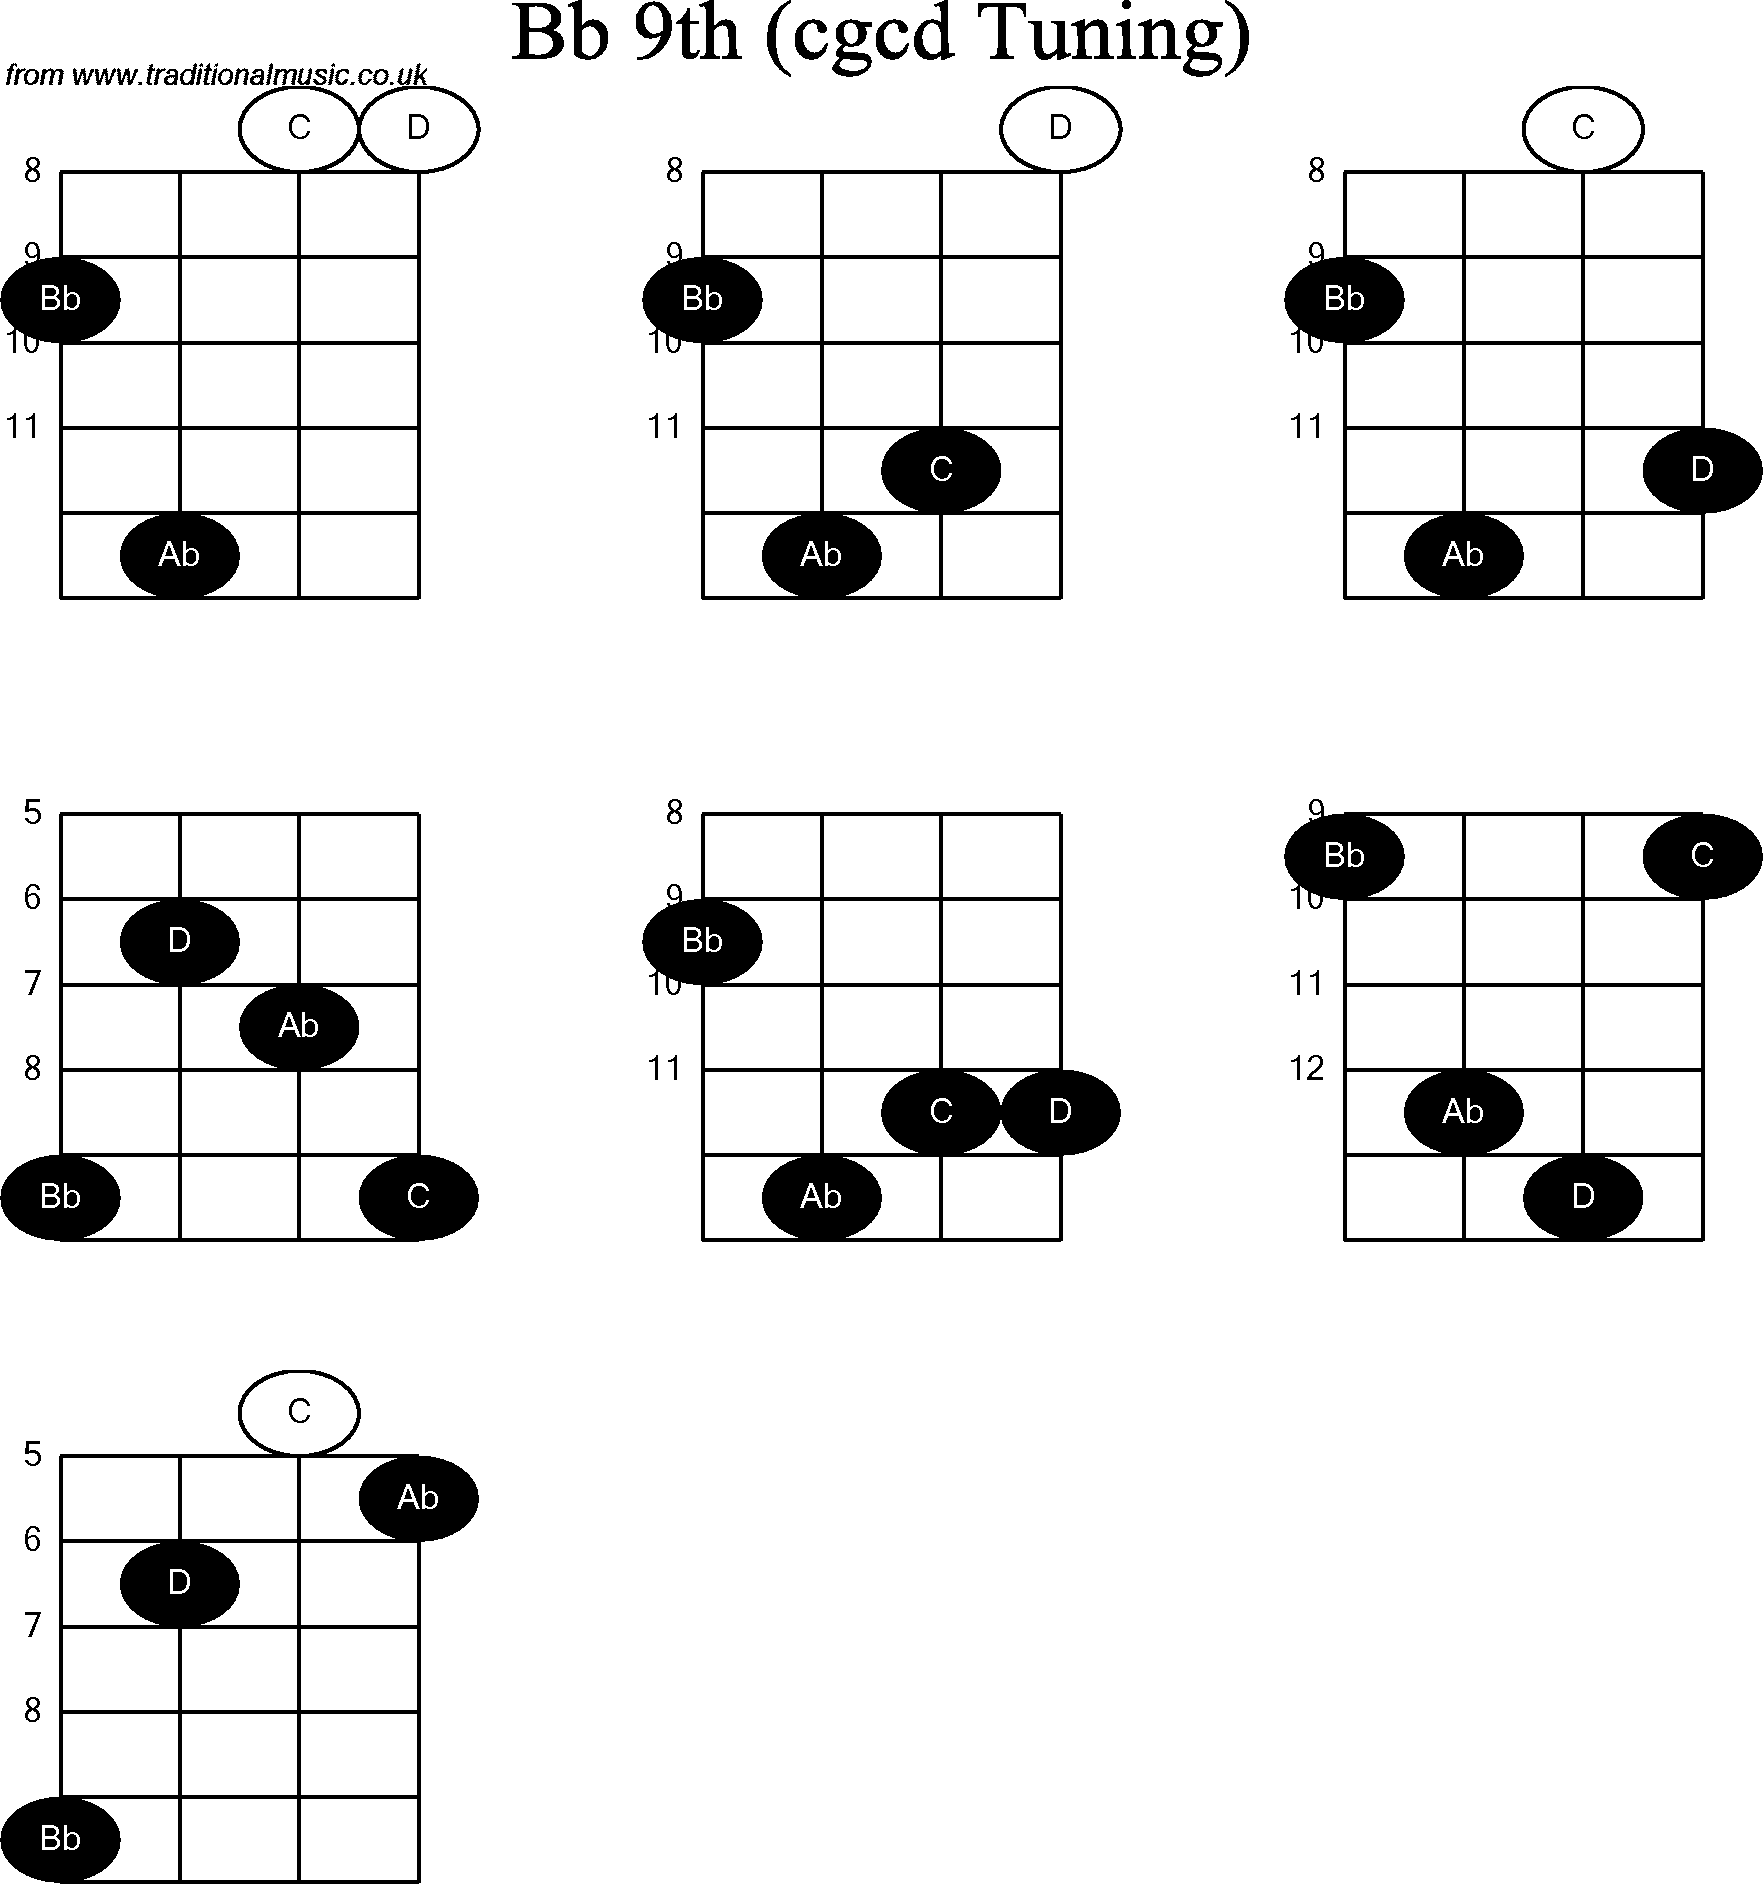 Chord diagrams for Banjo(Double C) Bb9th